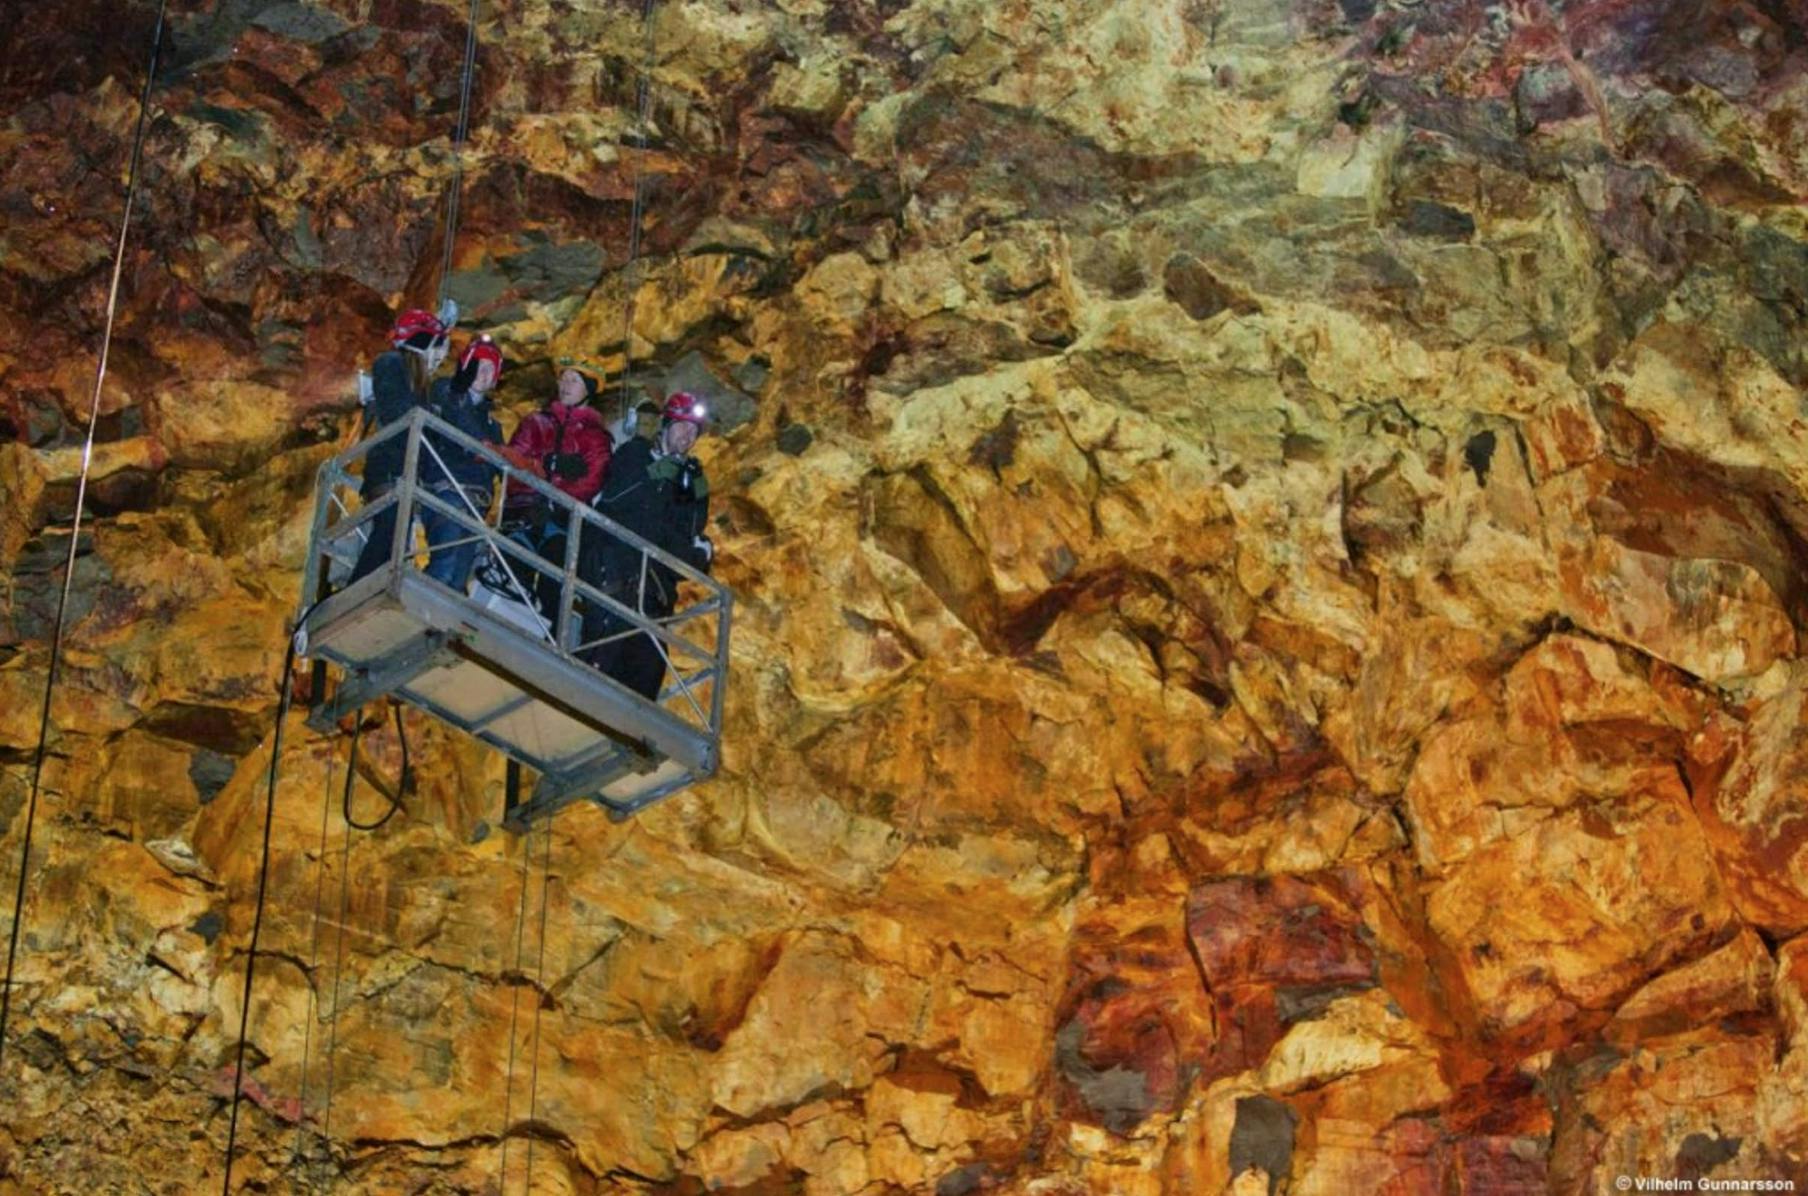 A group of people in a cable car inside a volcano. 